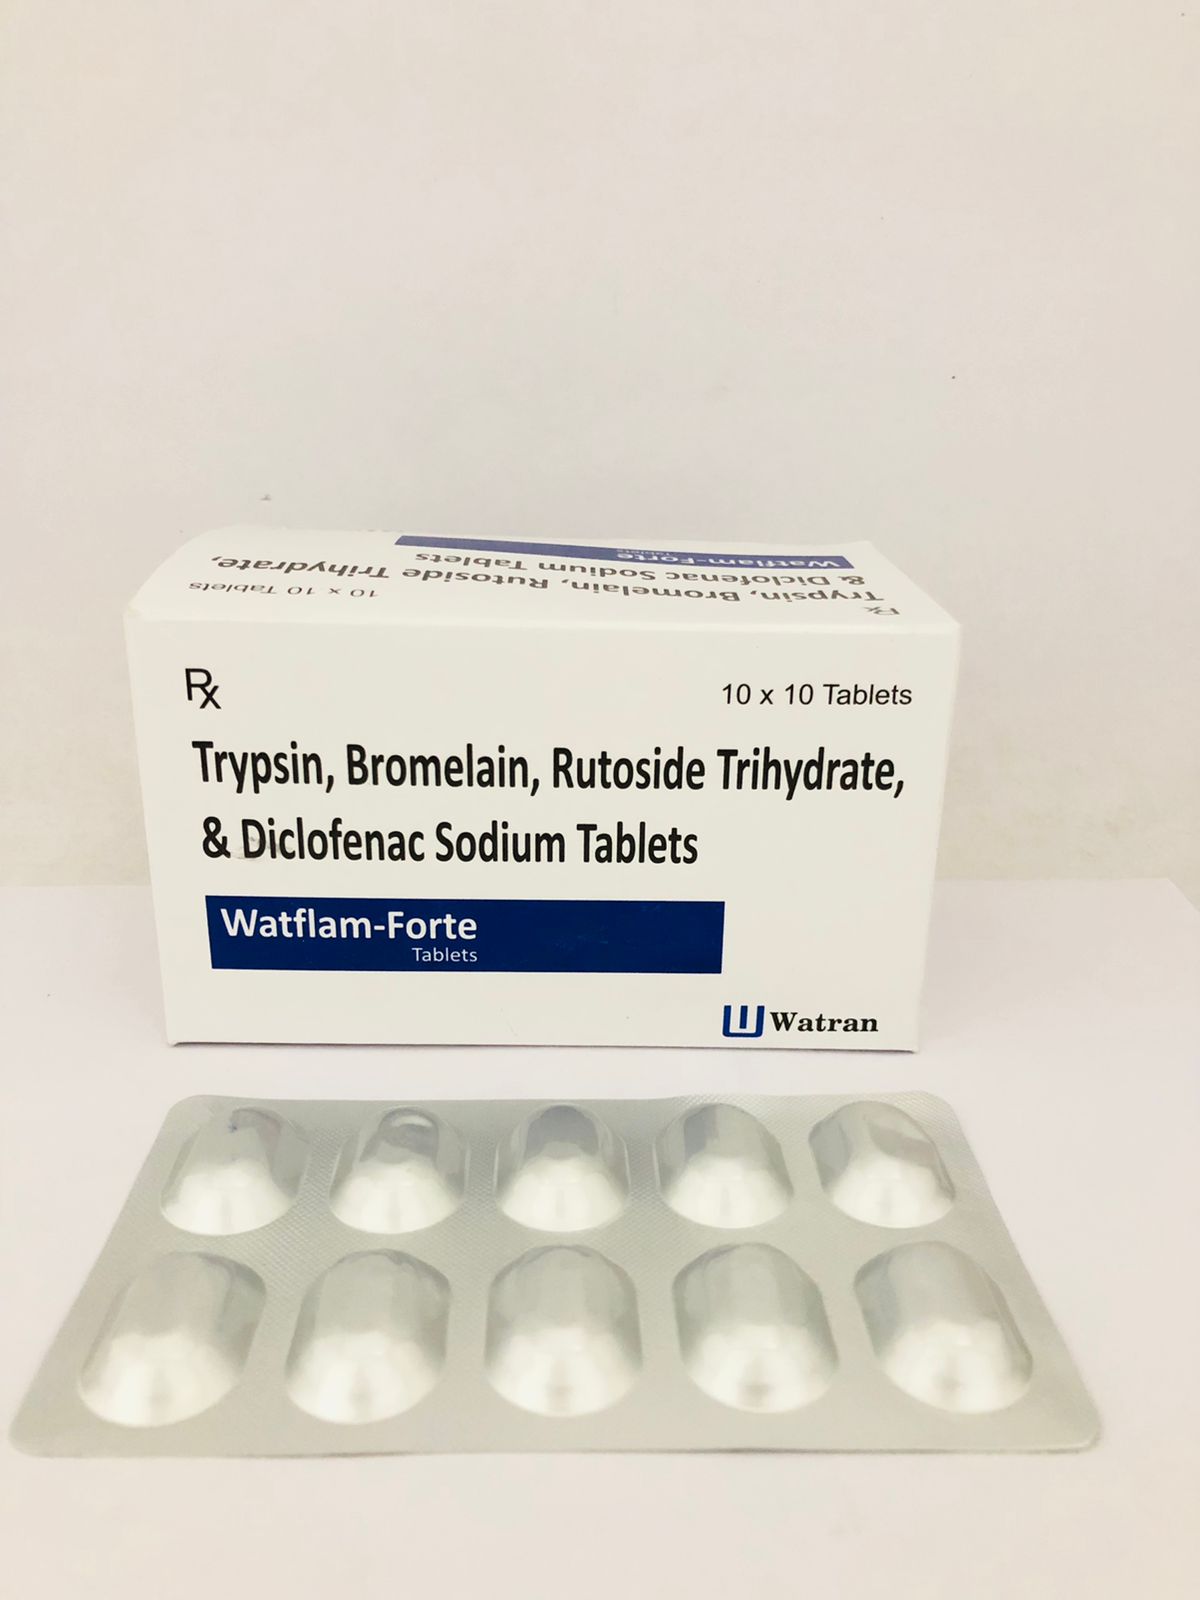 WATFLAM-FORTE TABLETS